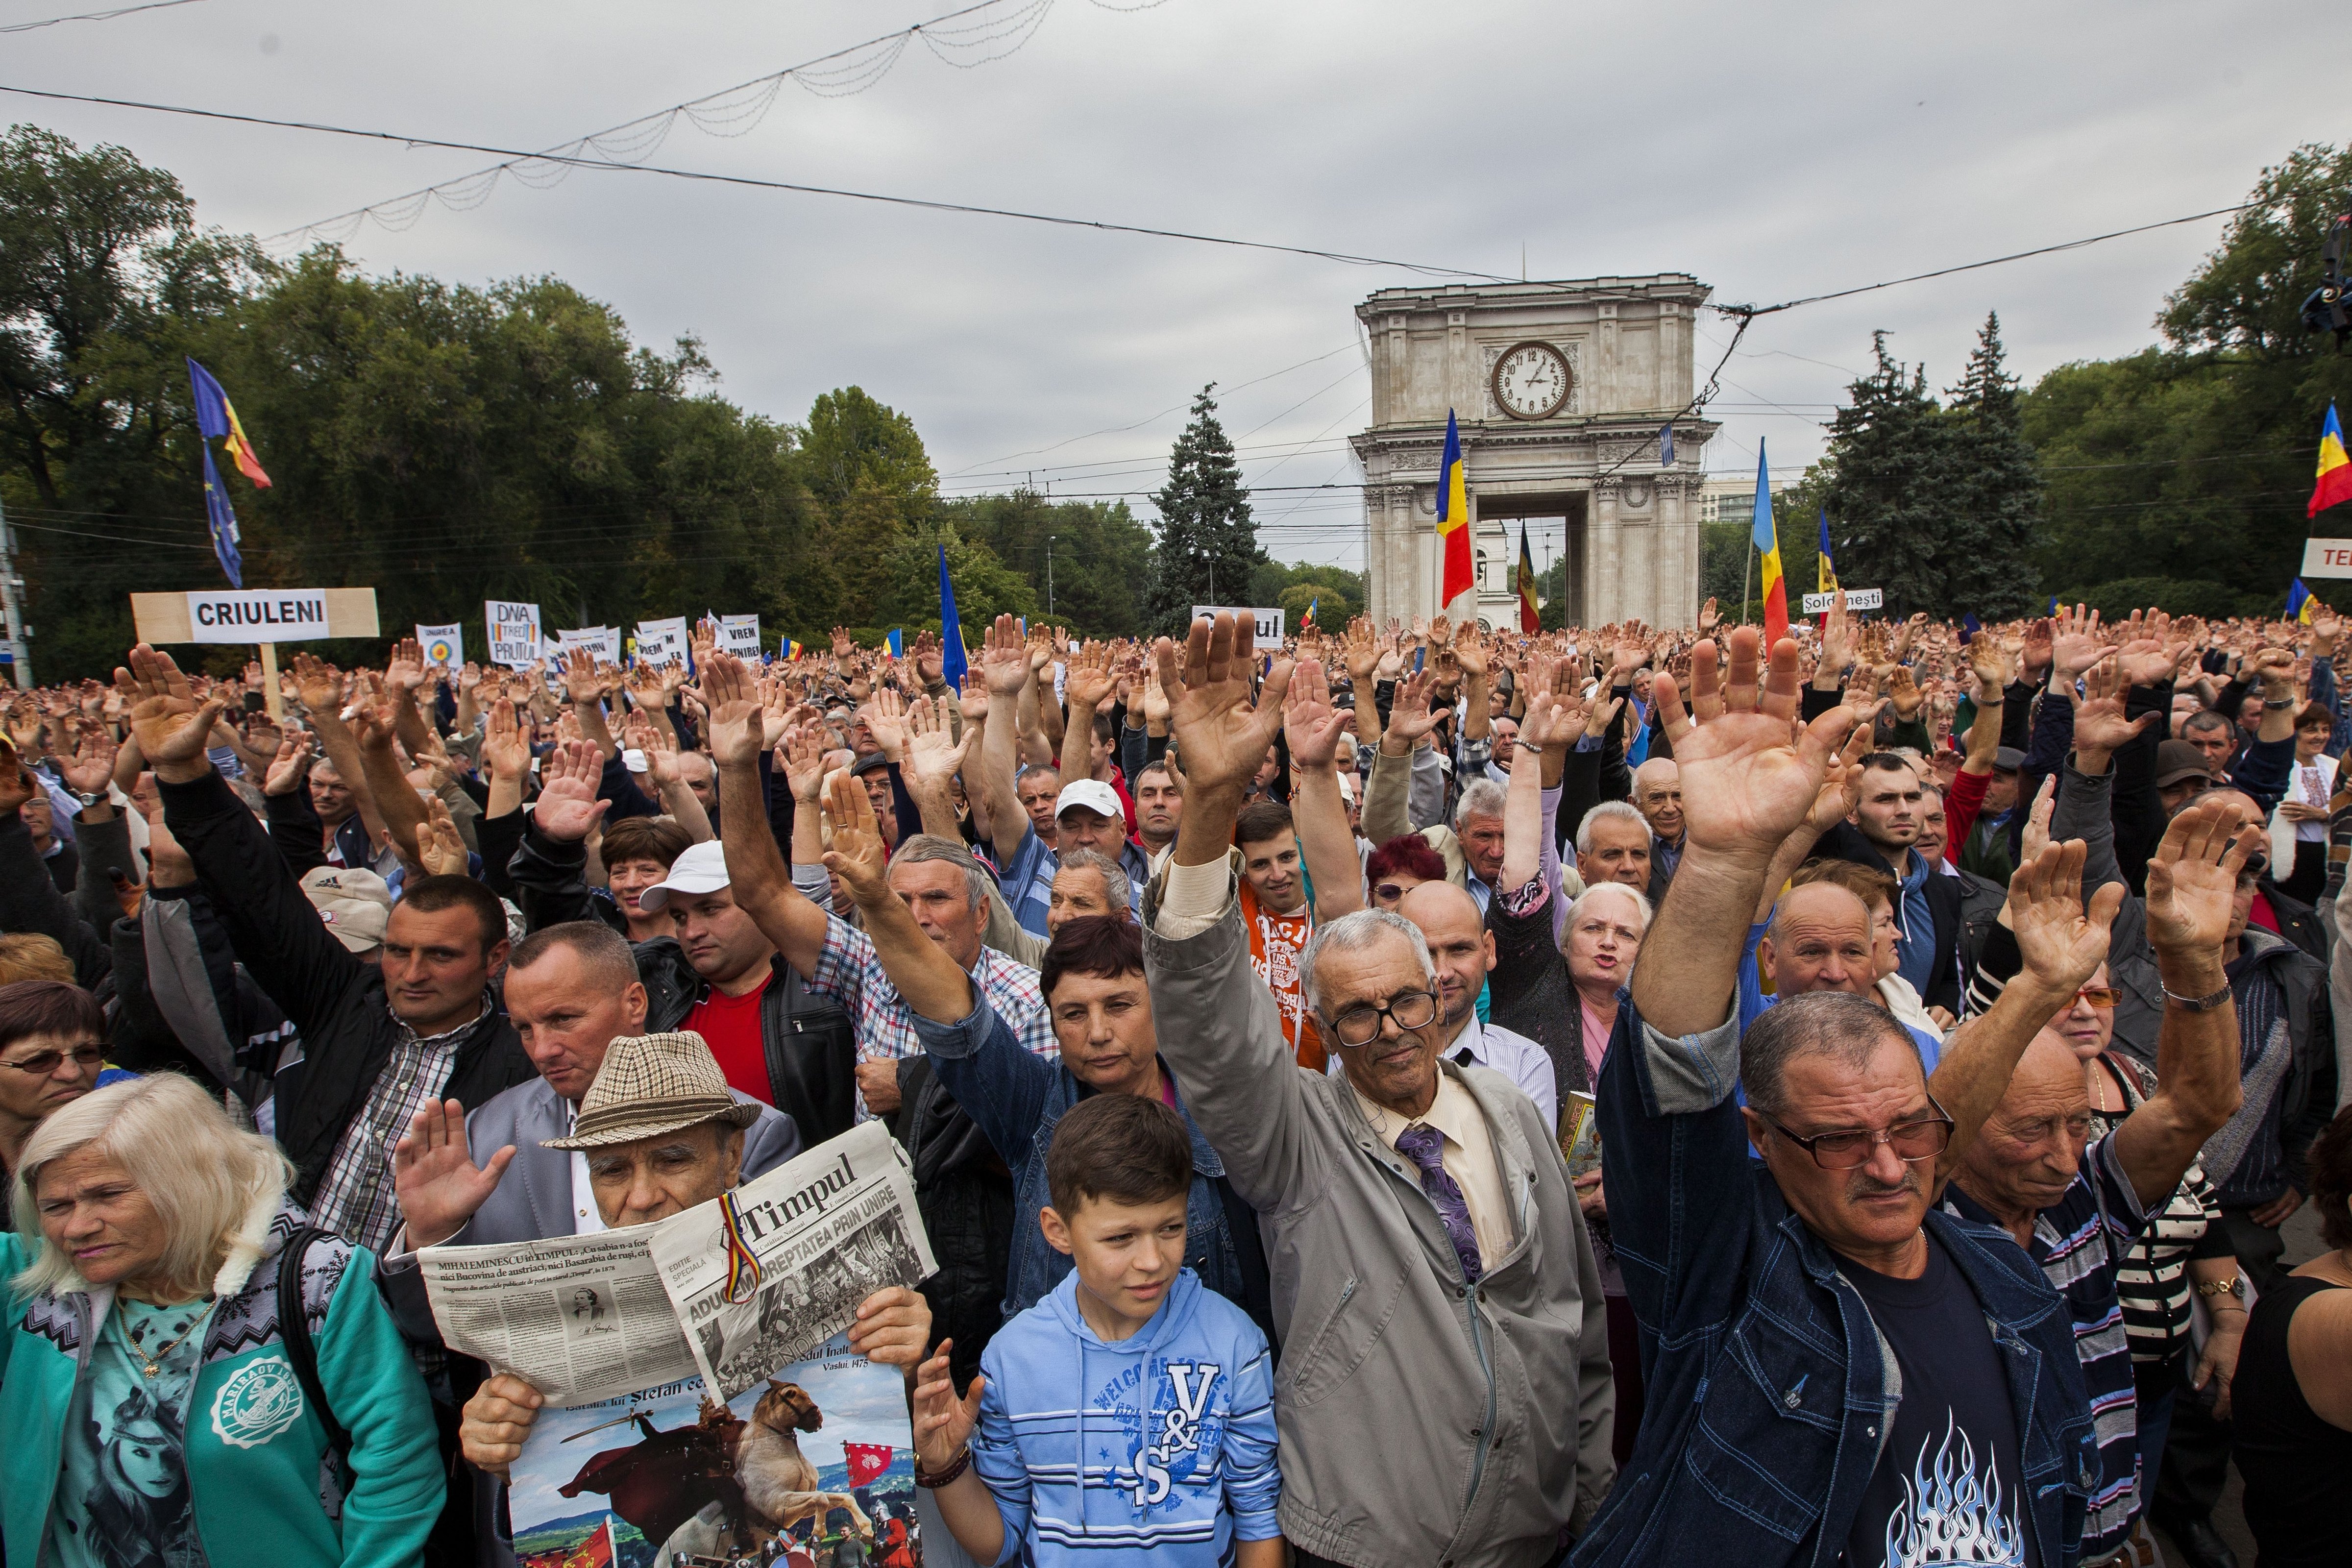 People take part in a rally demanding the resignation of President Nicolae Timofti in Chisinau, Moldova on September 13, 2015.